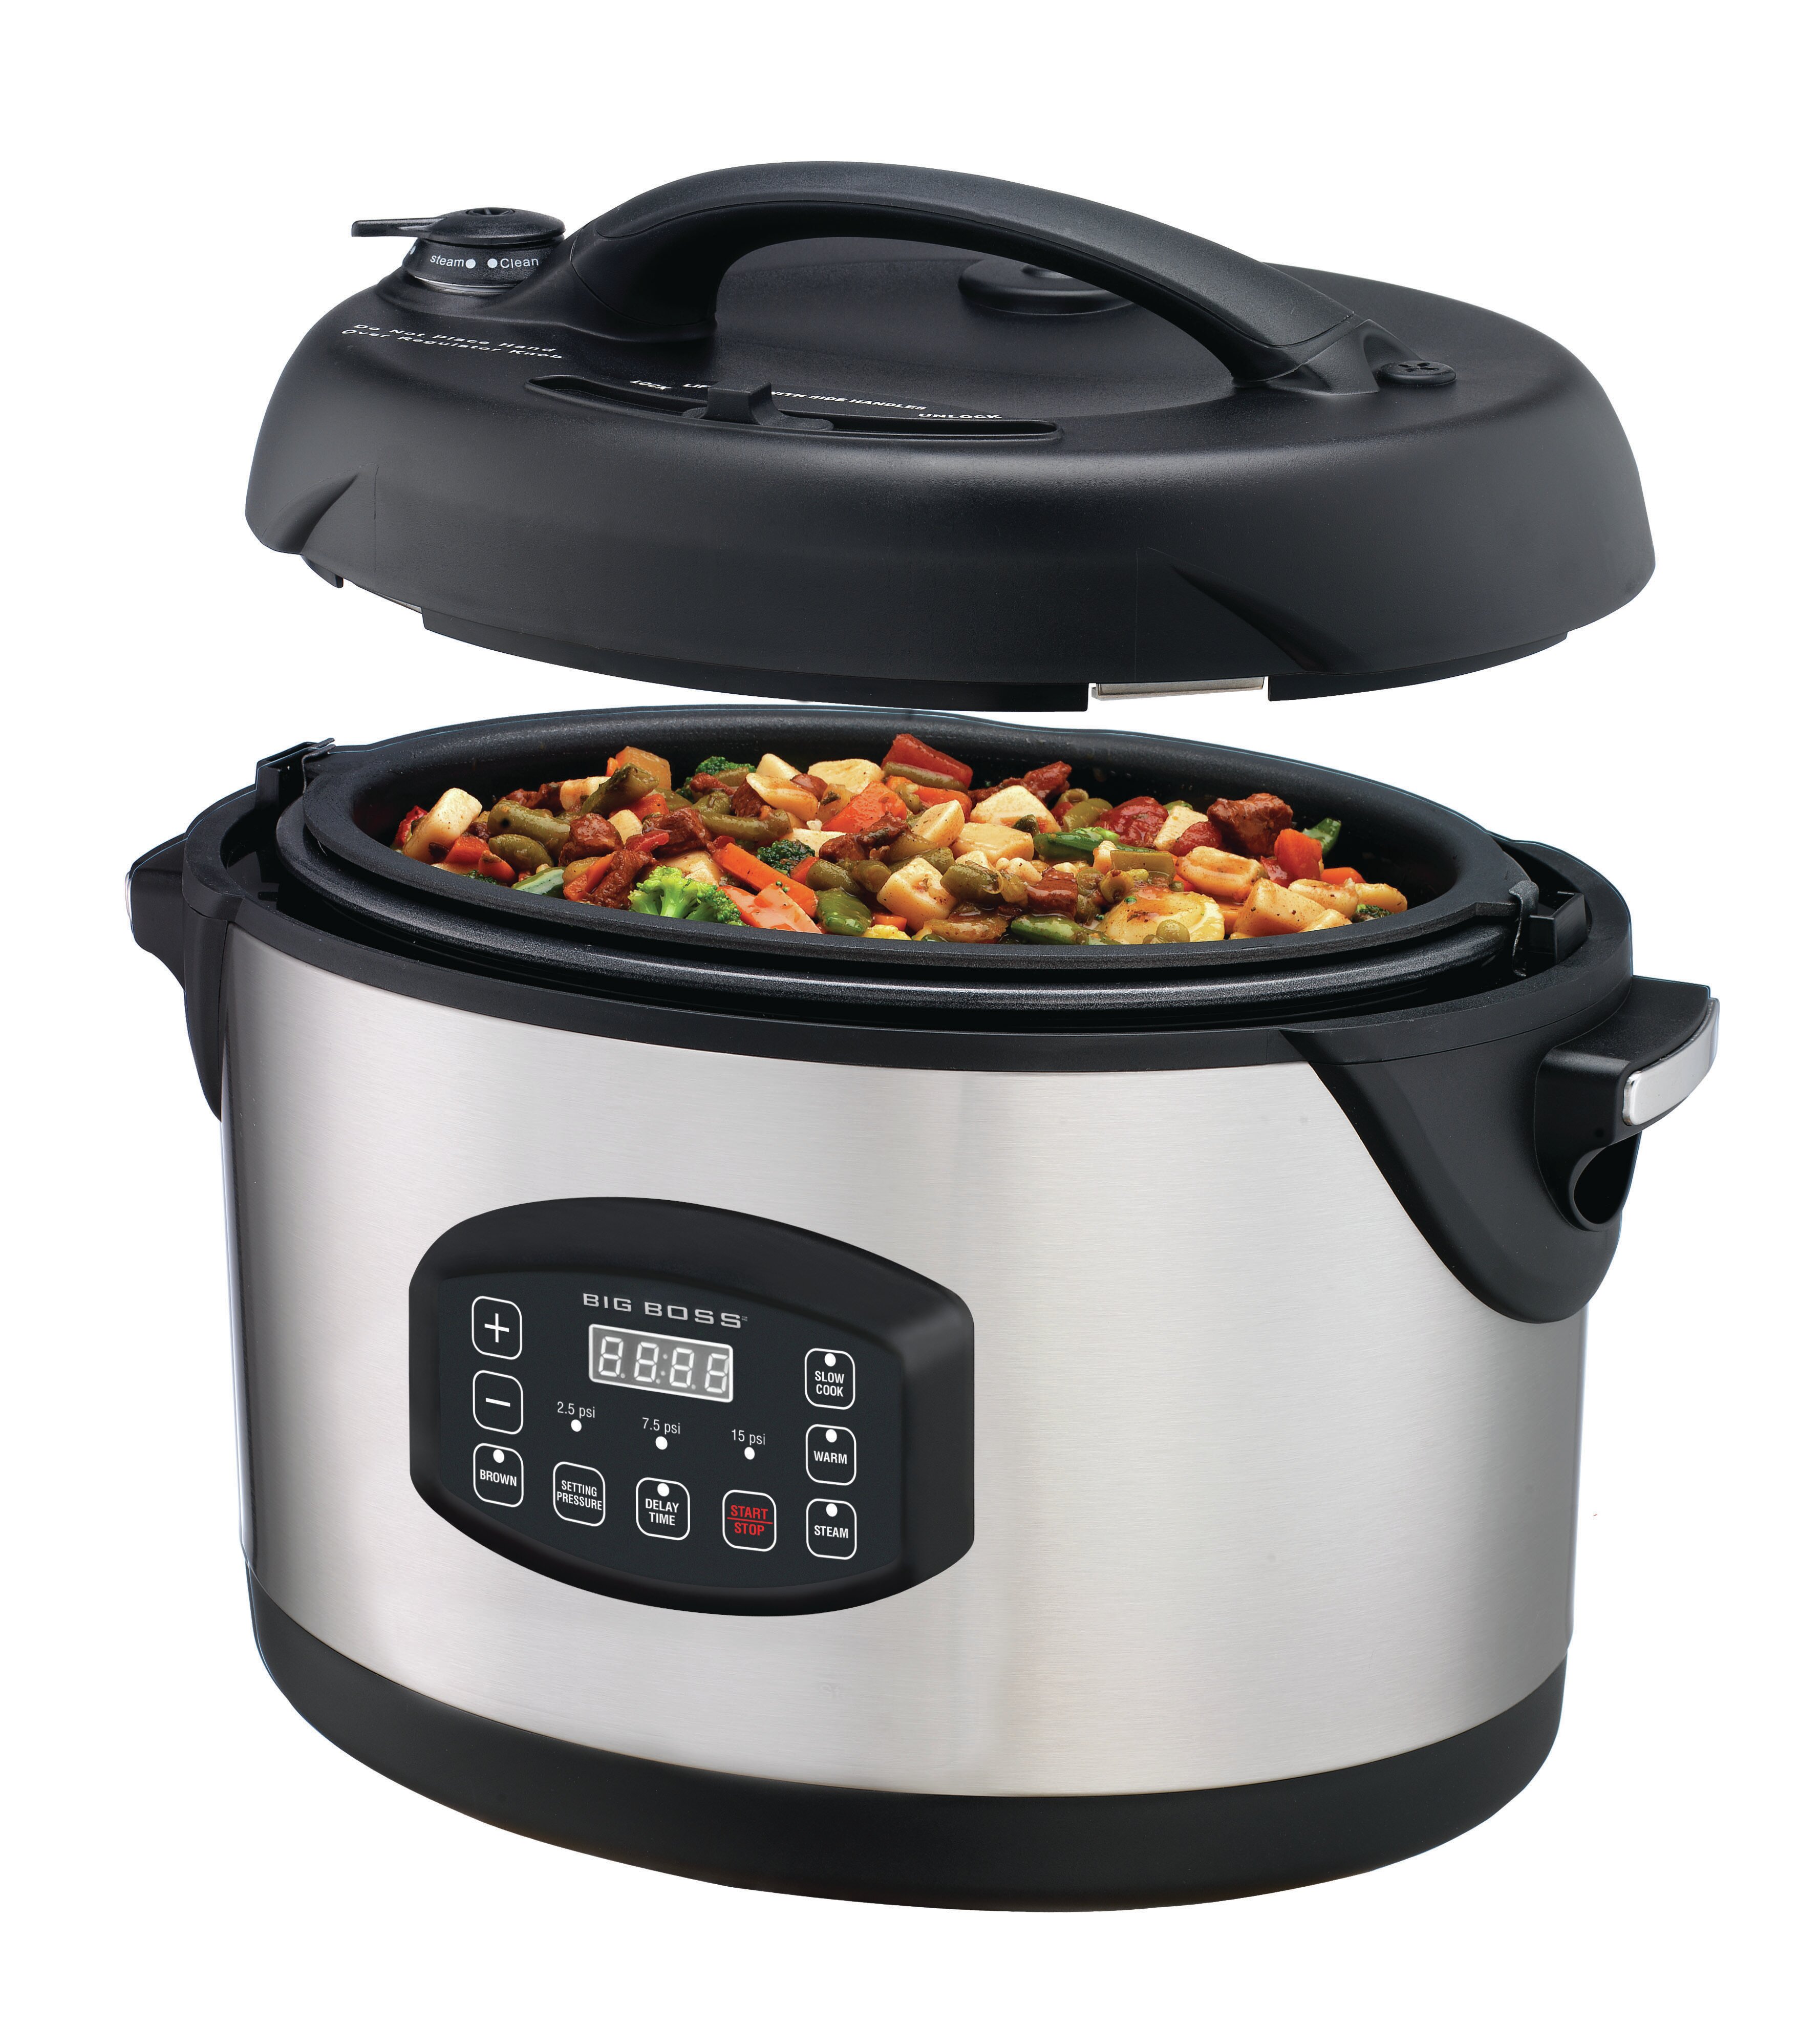 A Look at the Cooks Essentials 8 1/2 qt Oval Pressure Cooker 